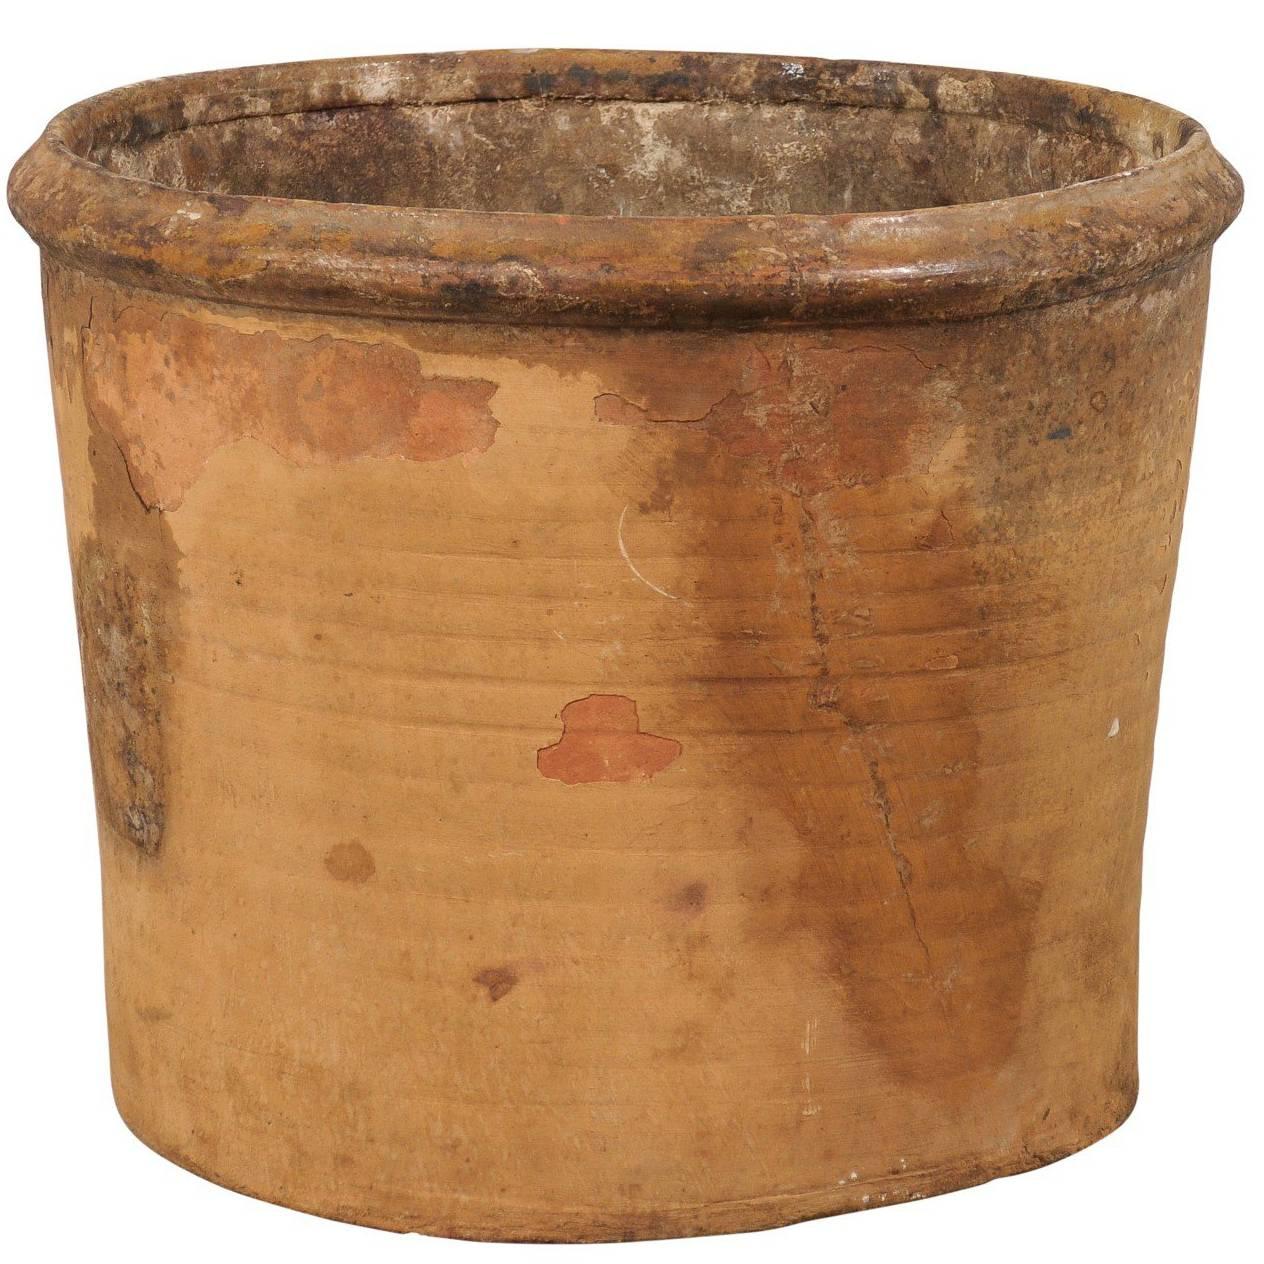 What is the difference between terracotta and clay pots?